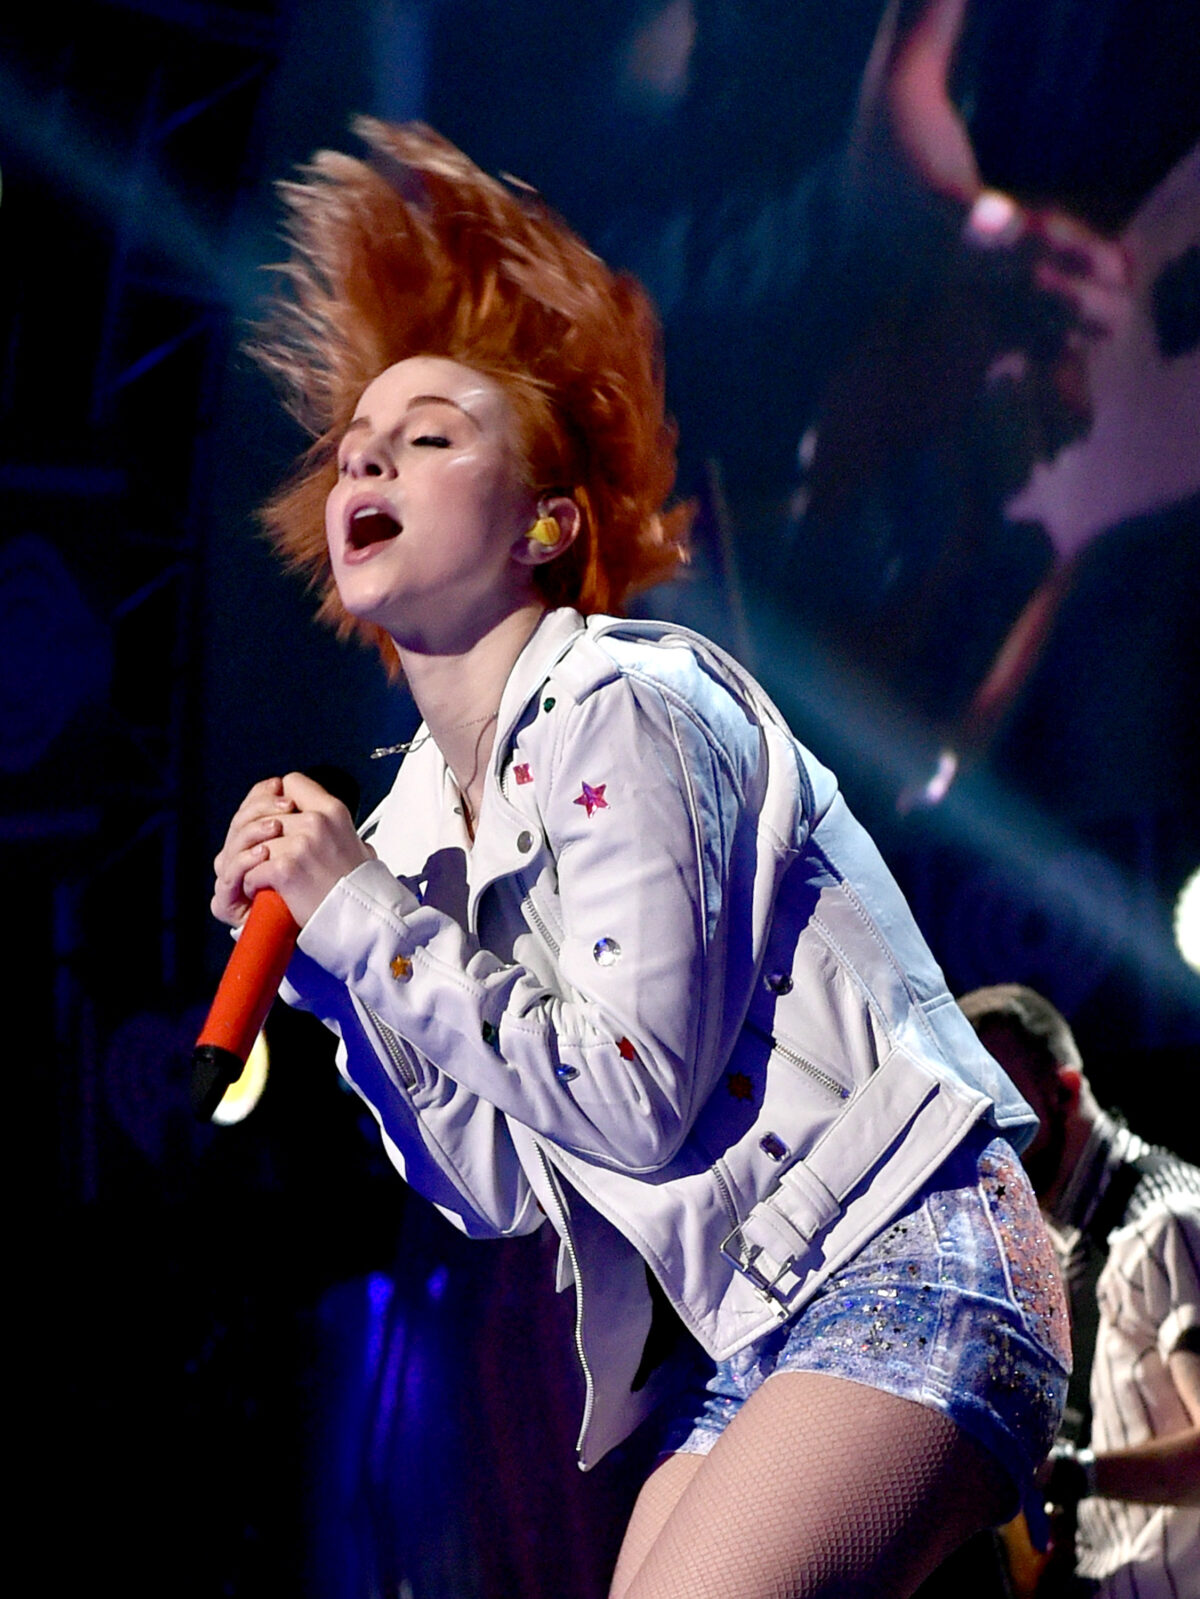 Musician Hayley Williams of the rock group Paramore